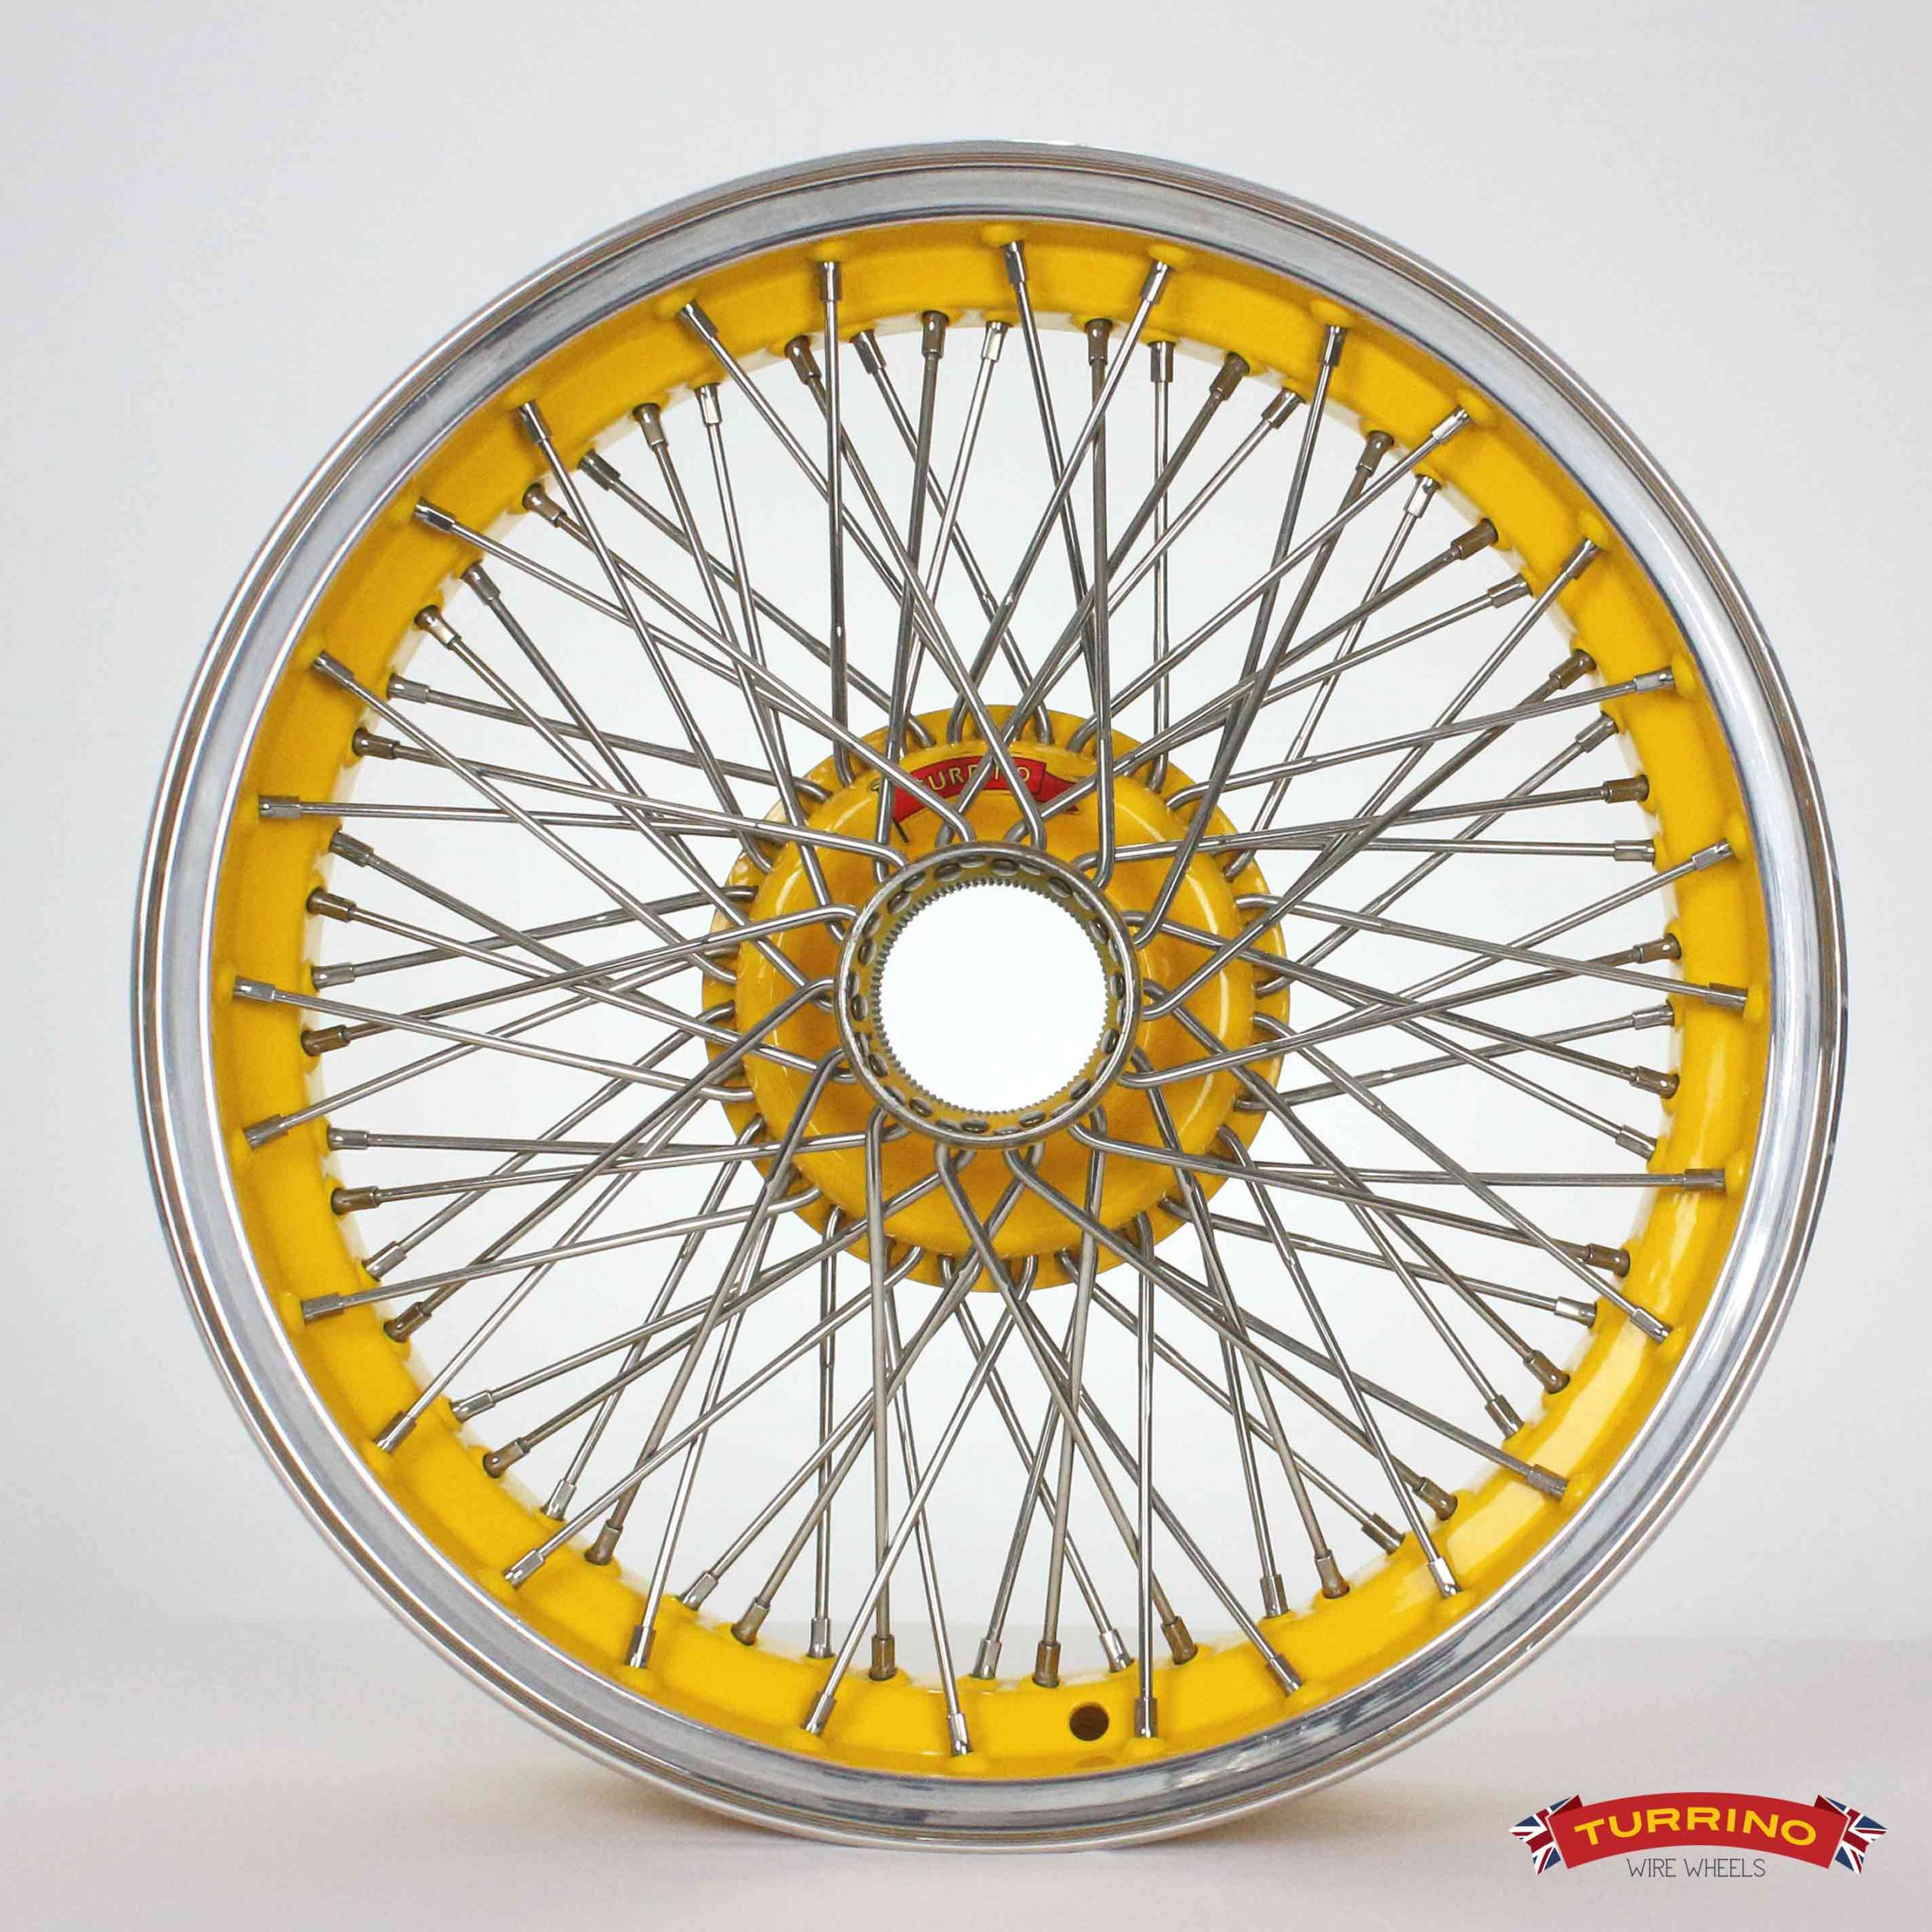 4x18 alloy rim yellow with stainless spokes centre outer laced brightened up